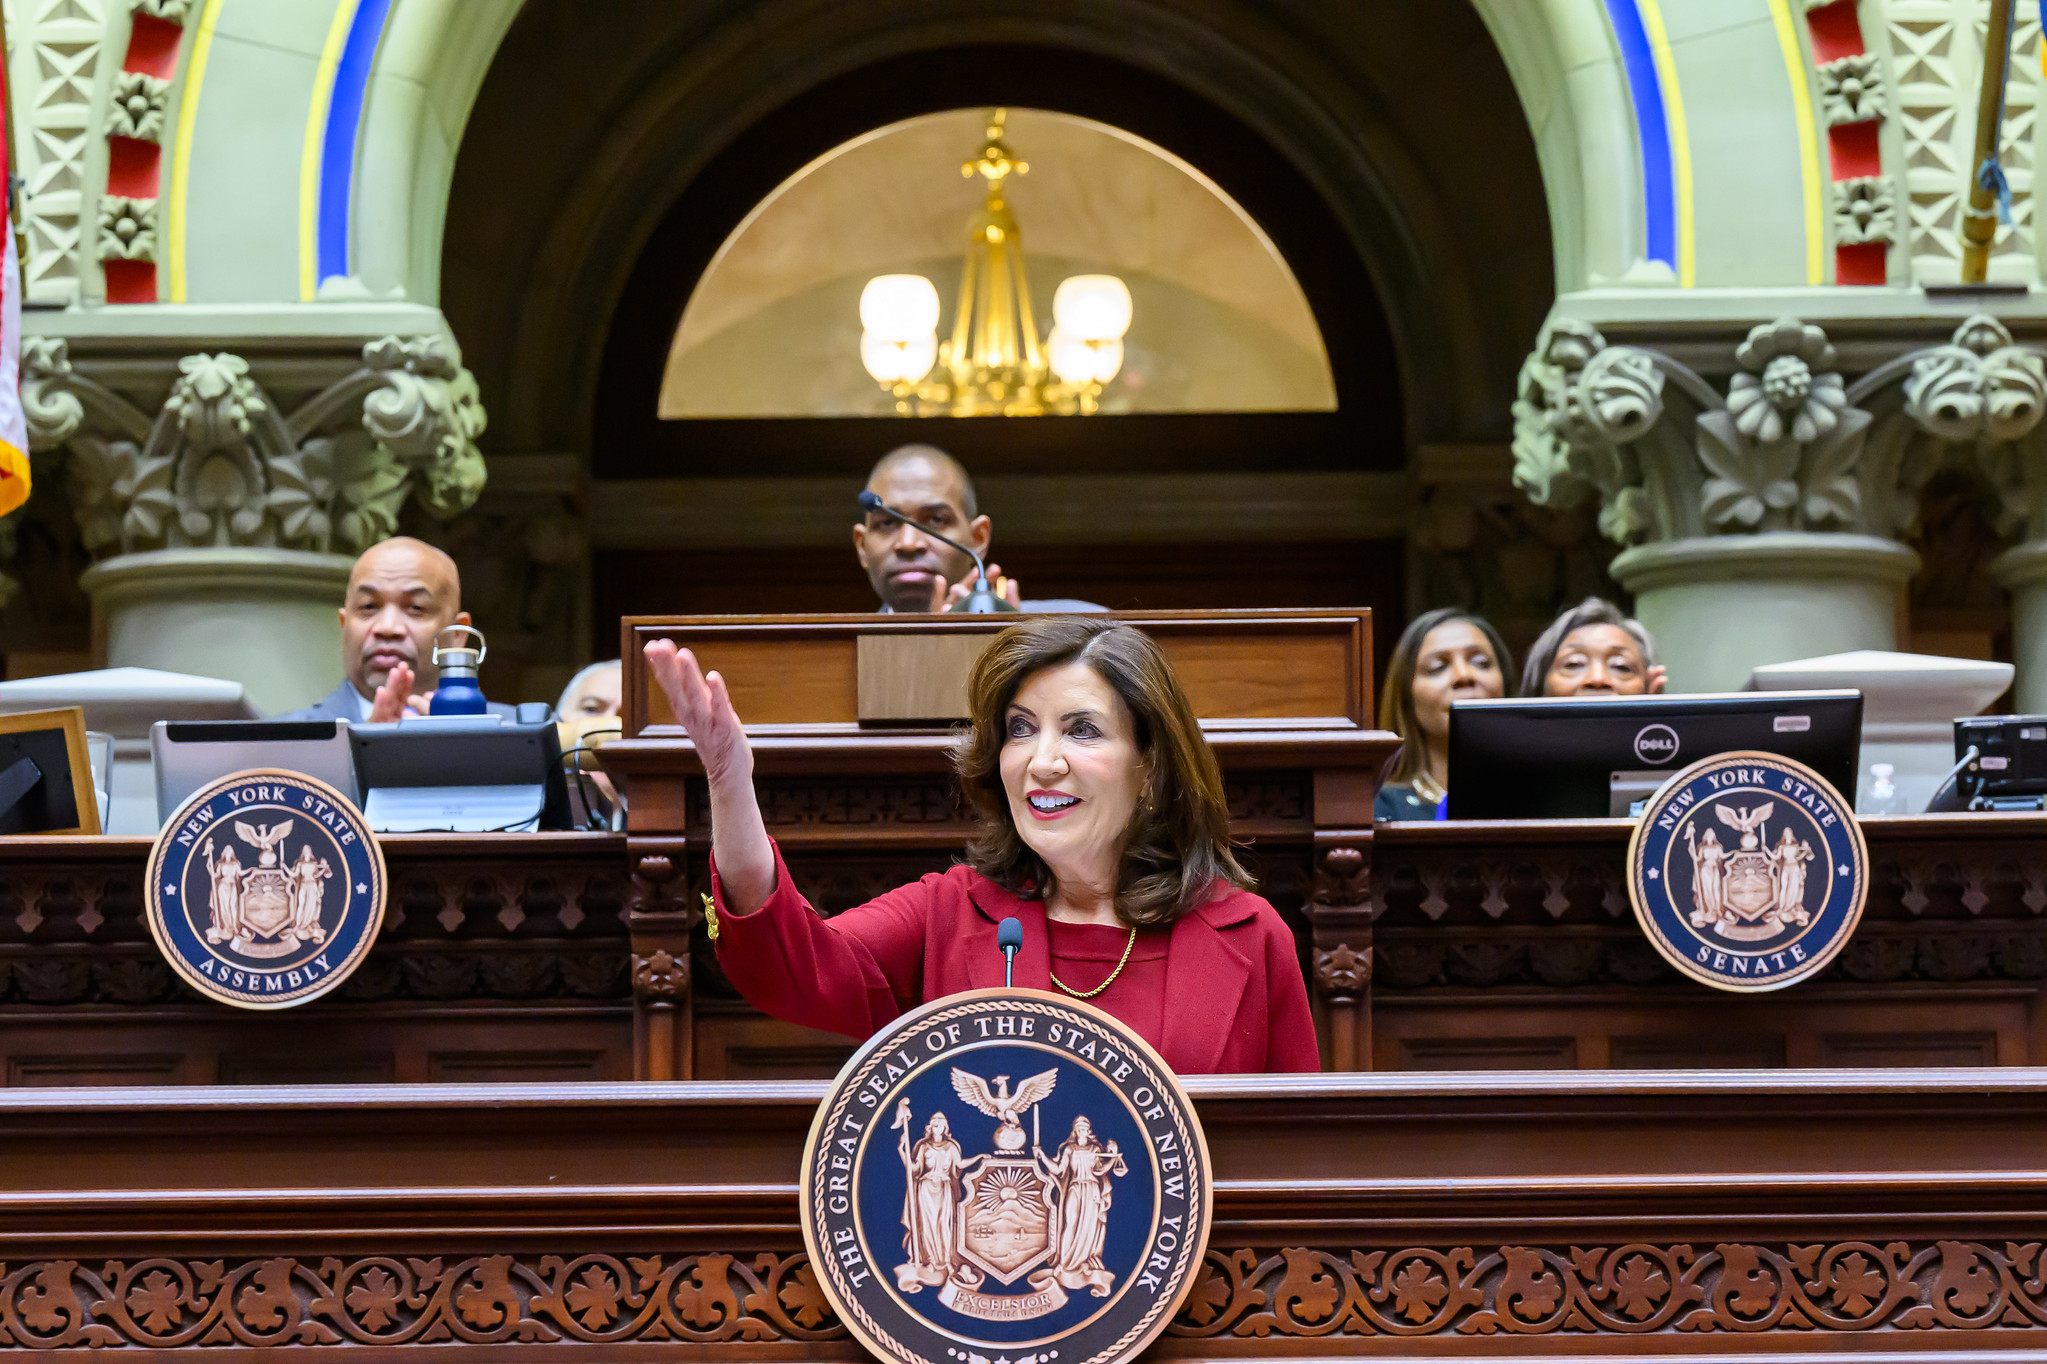 Governor Hochul at the podium, arm raised, giving the 2024 state of the state speech.